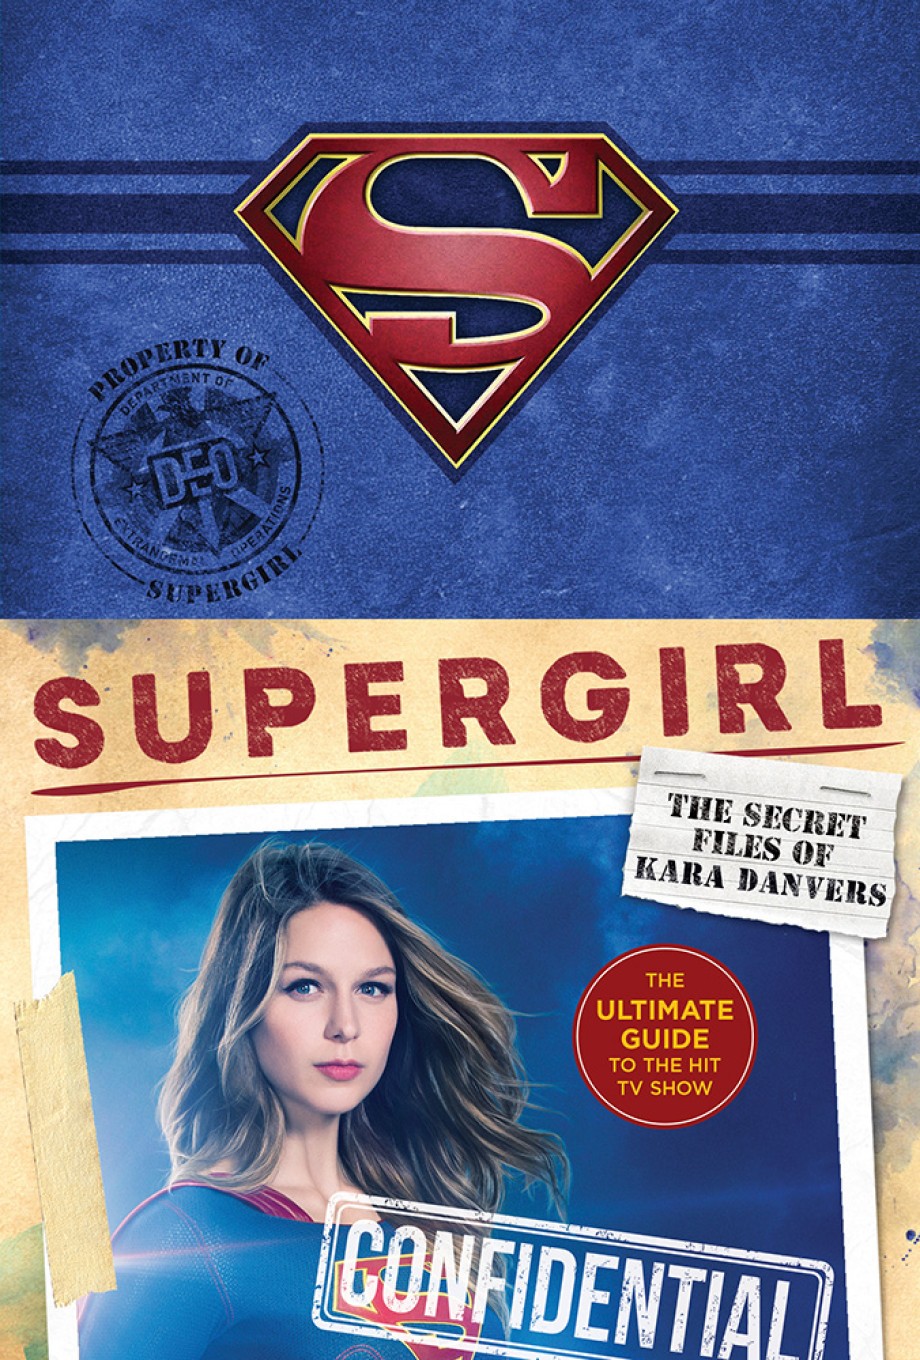 Supergirl: The Secret Files of Kara Danvers The Ultimate Guide to the Hit TV Show